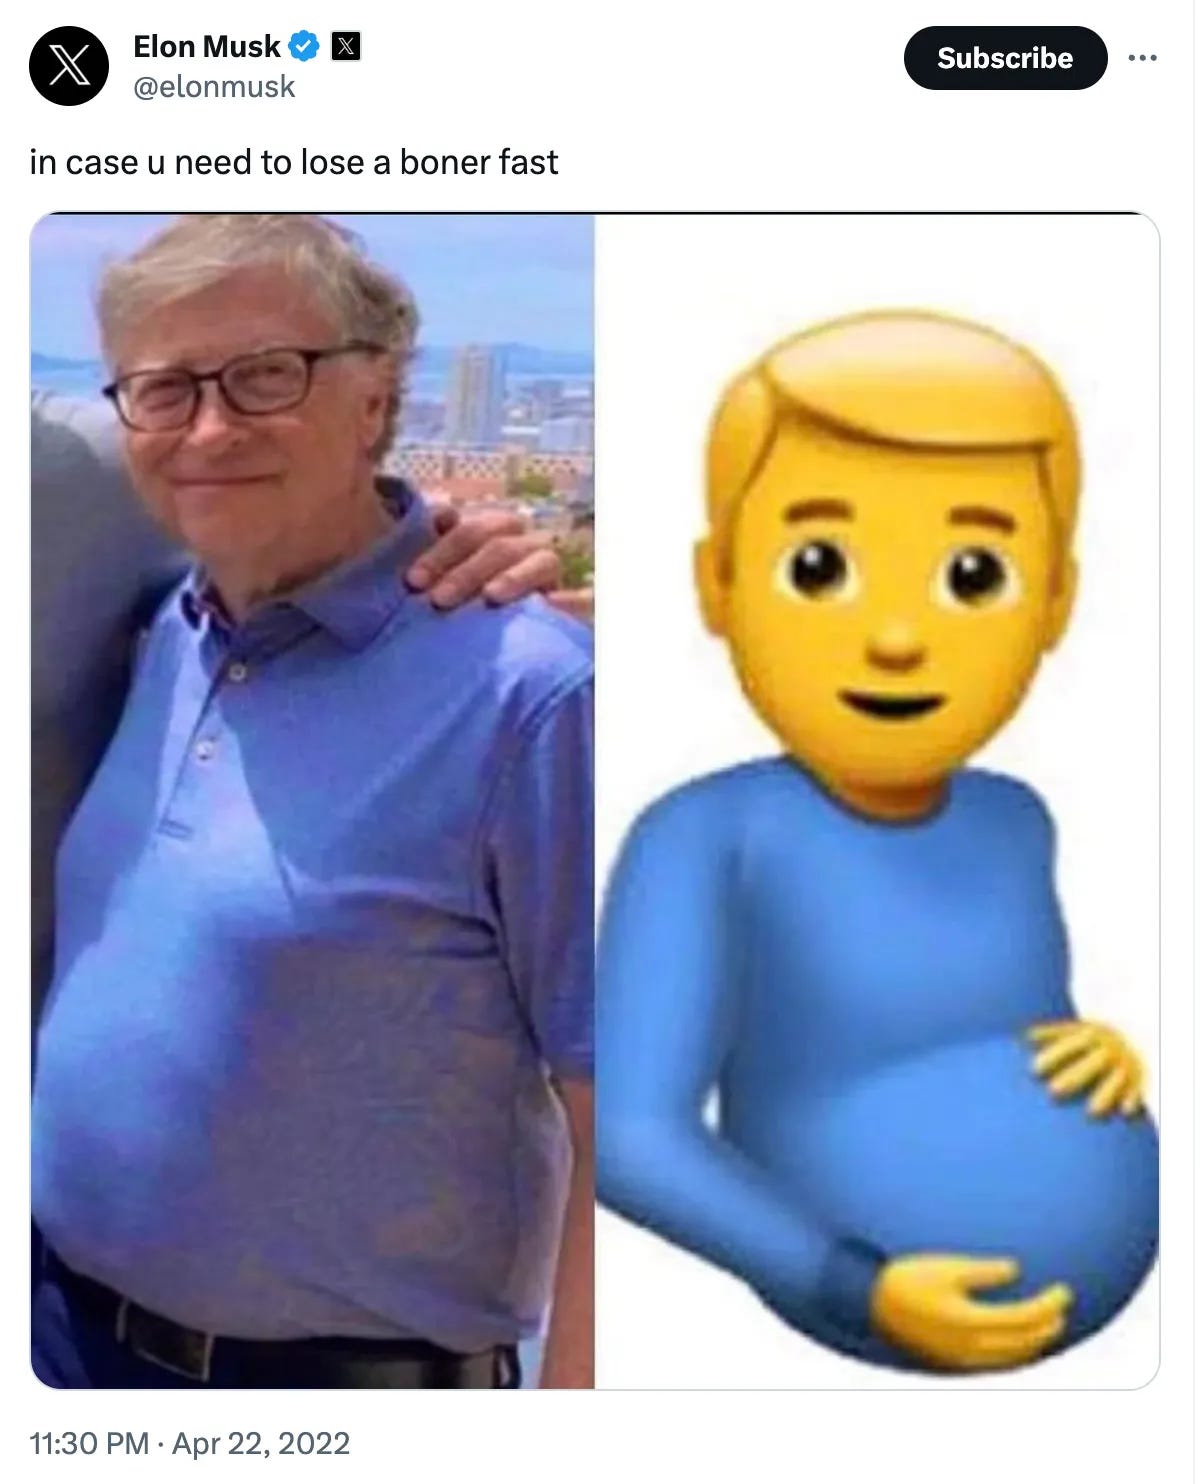 Tweet from Musk: "in case u need to lose a boner fast." Image Bill Gates with pot belly next to emoji of pregnant man.